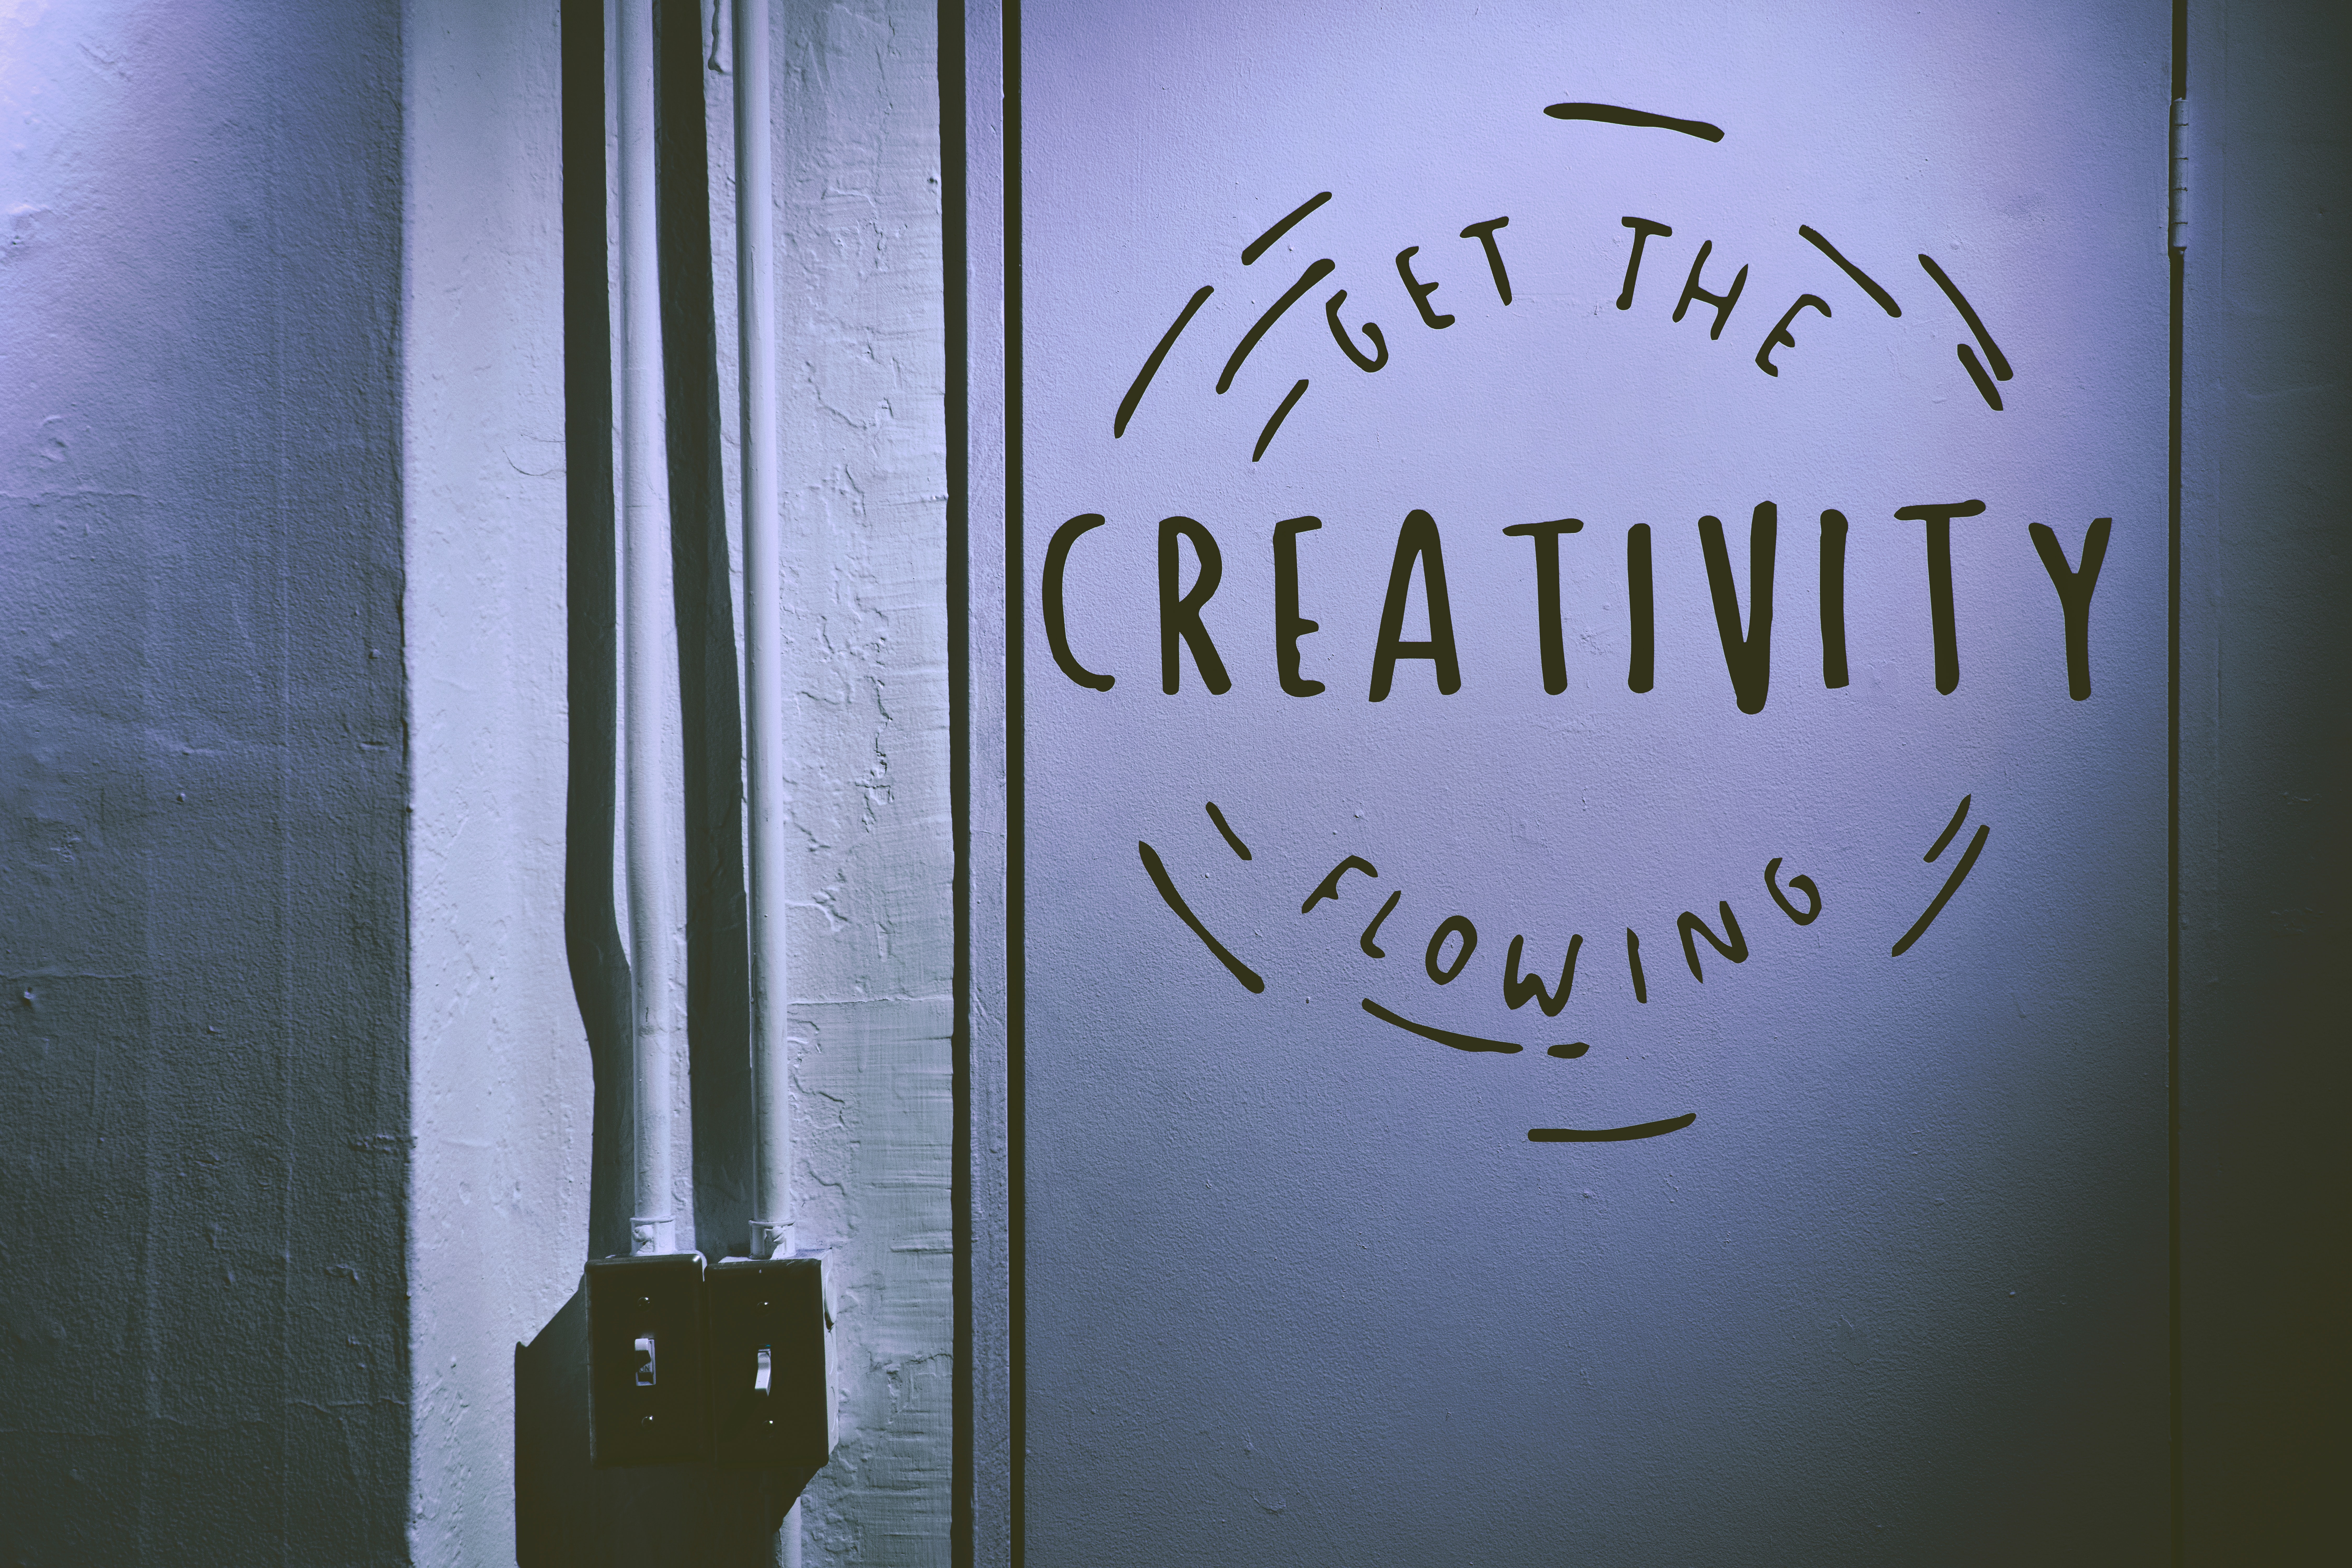 Get the creativity flowing sign.